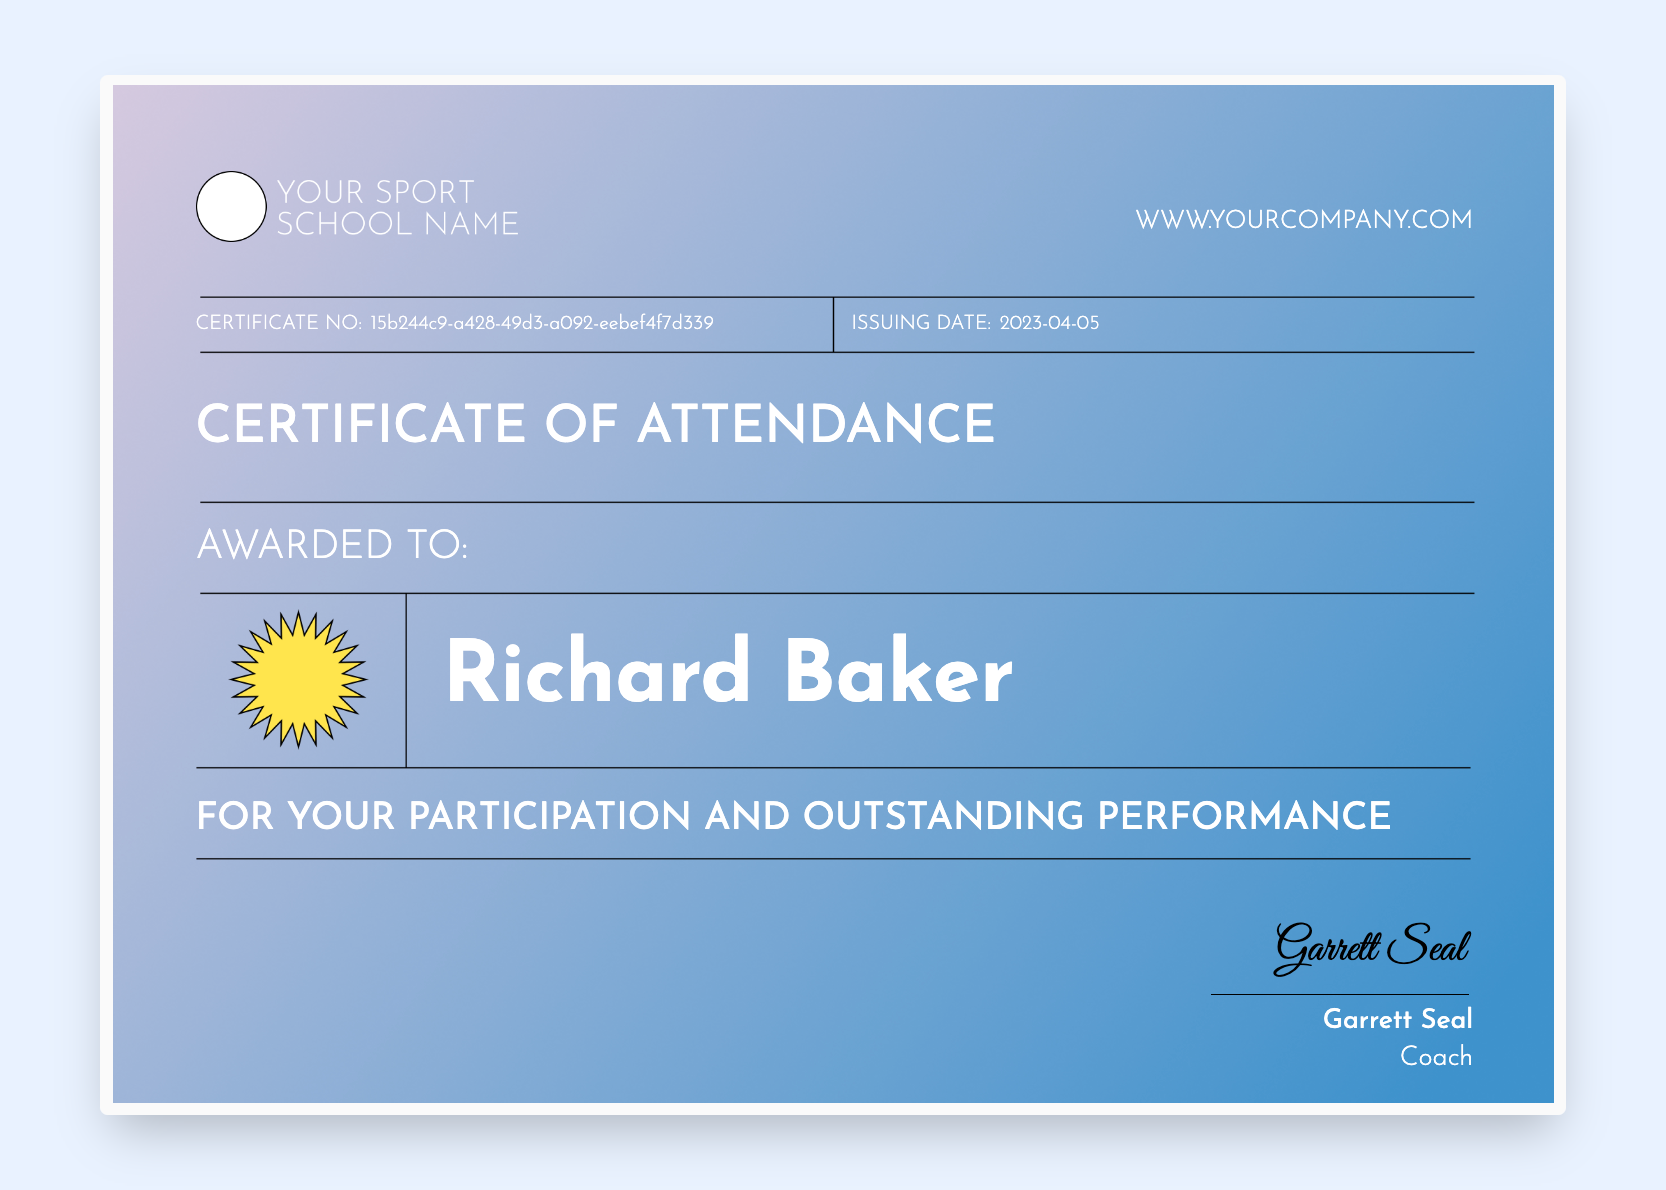 Playful certificate of attendance with colorful gradient.